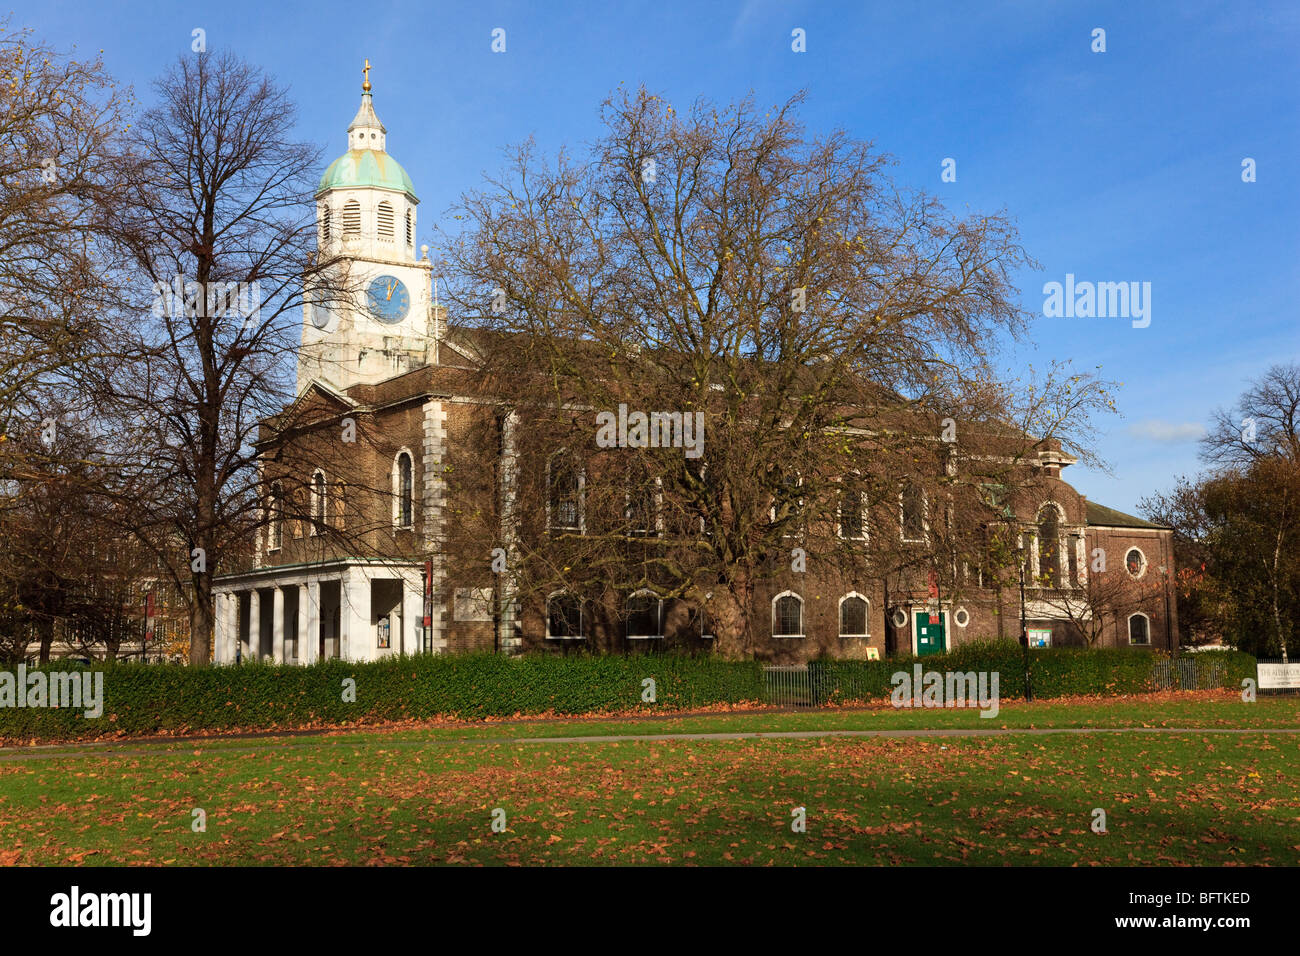 Autumn view of the Church of the Holy Trinity, Clapham Common North, Clapham, London, Uk Stock Photo